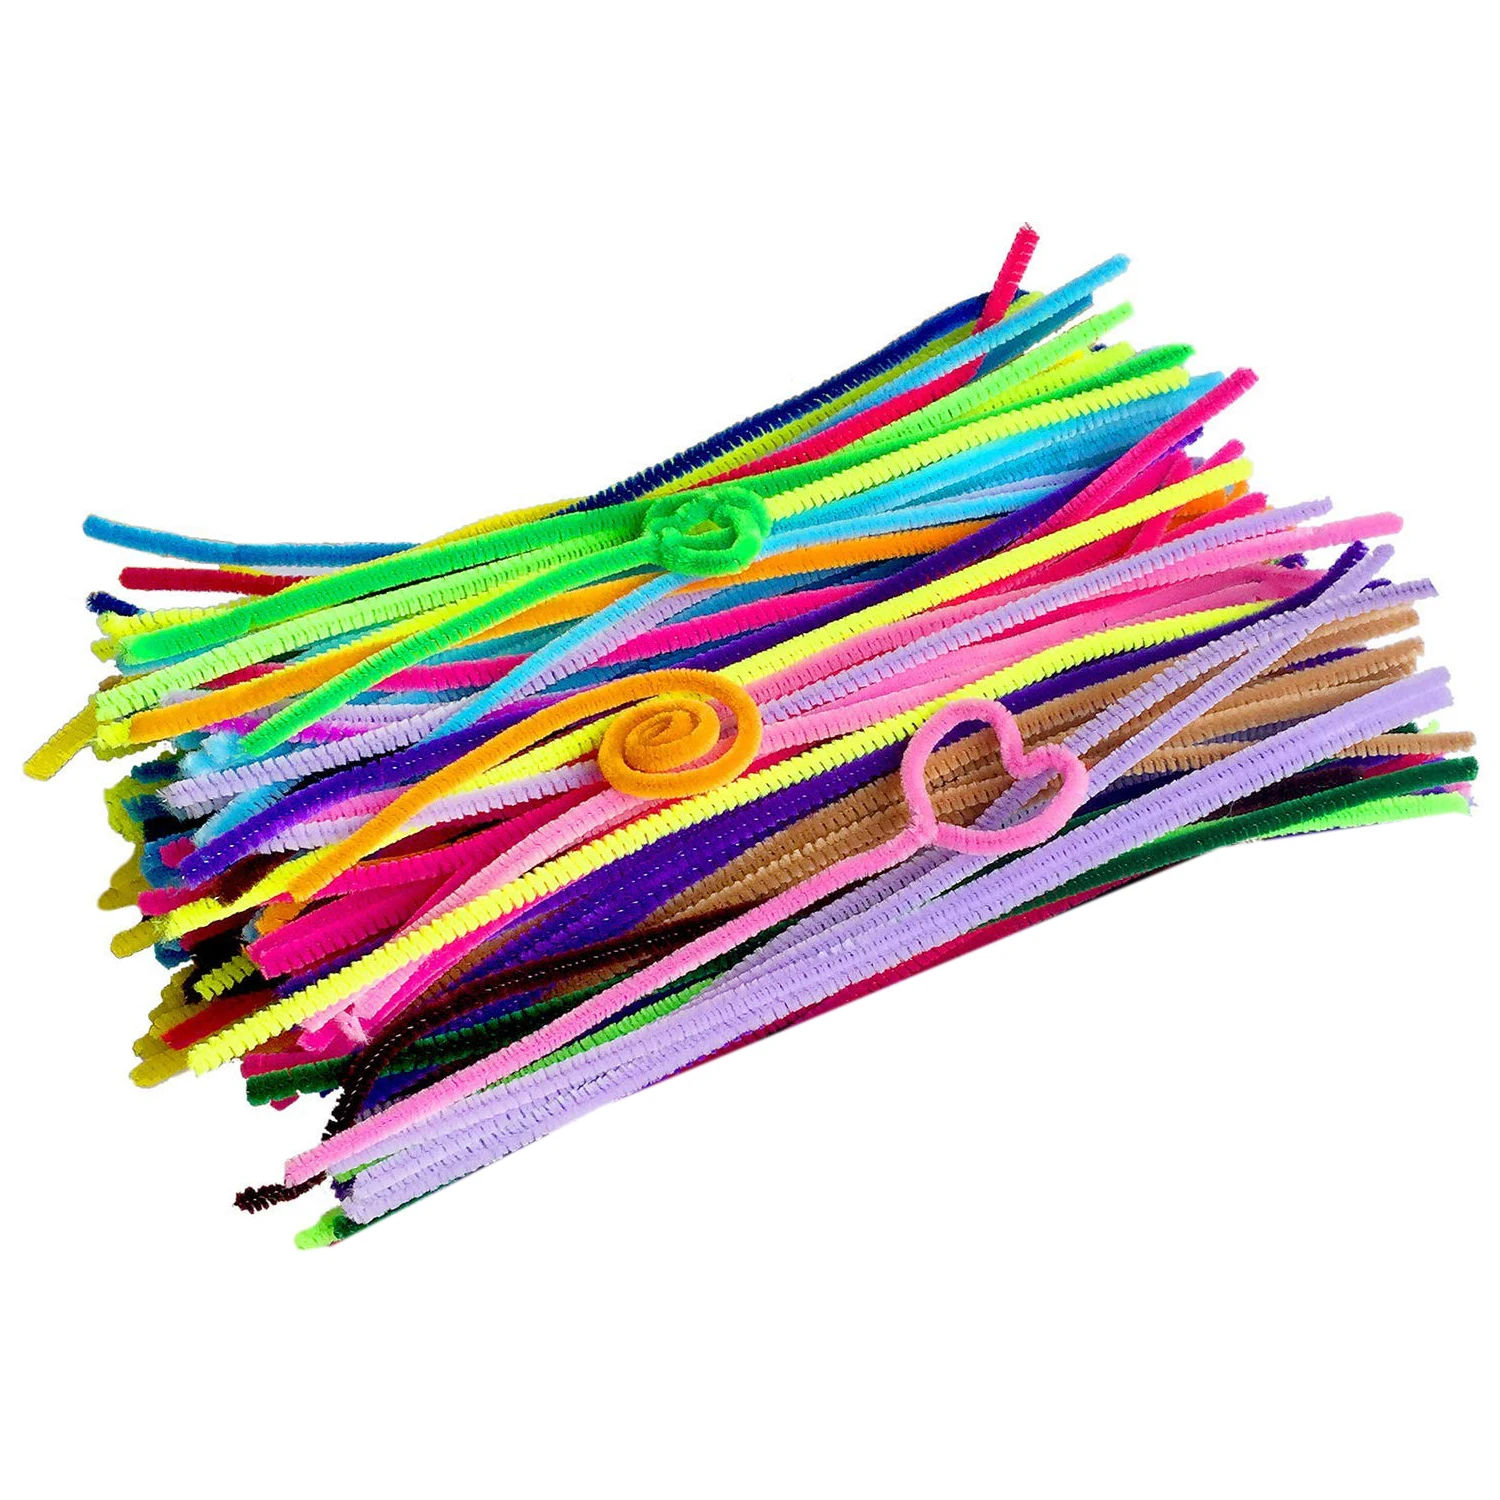 

300 Pcs Pipe Cleaners Chenille Stems 60mm x 300mm, Assorted Colors for DIY Art Craft Decorations